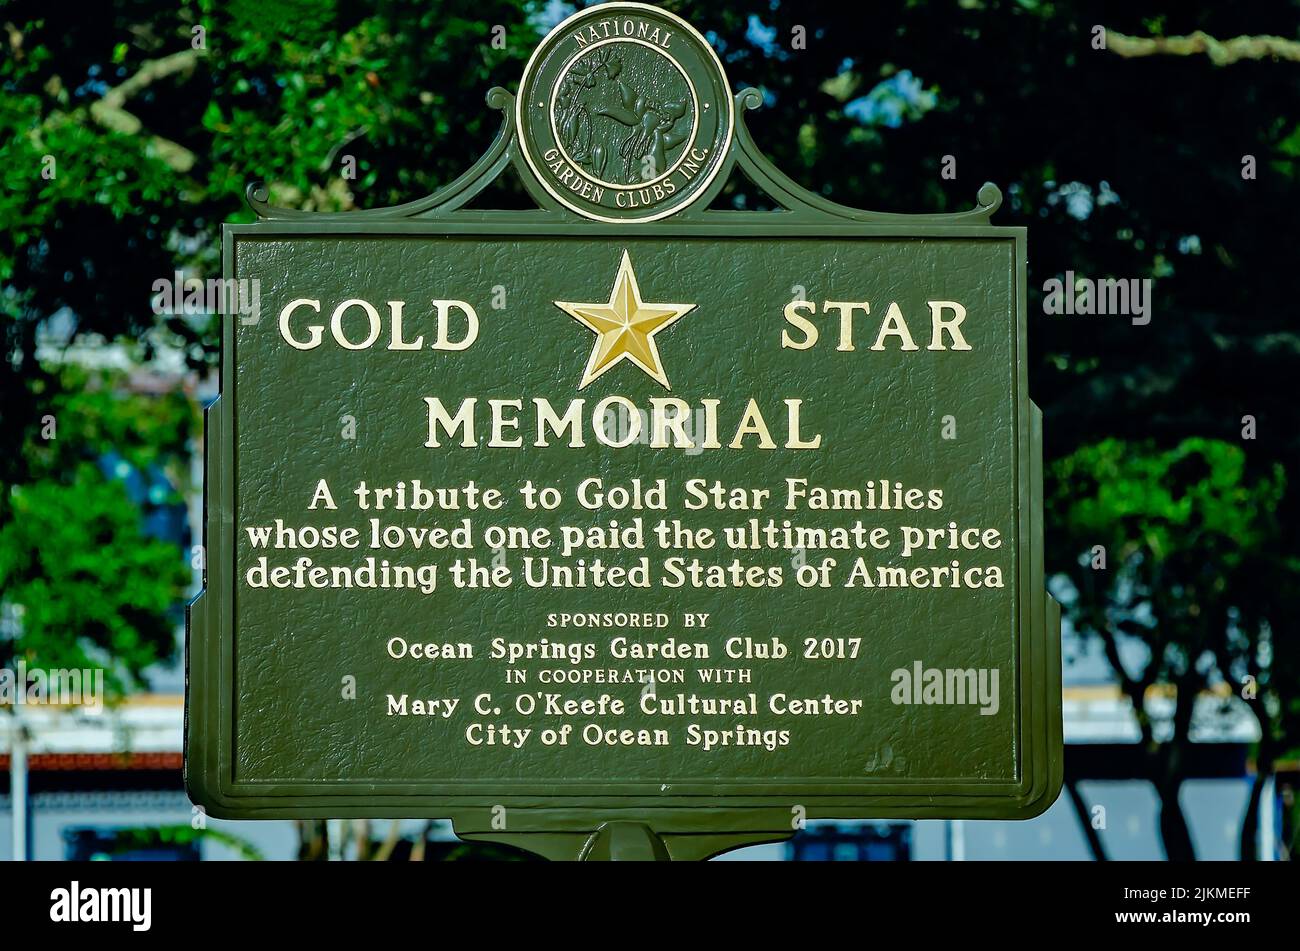 A Gold Star Memorial plaque is pictured at Pershing Square, July 31, 2022, in Ocean Springs, Mississippi. The plaque honors Gold Star Families. Stock Photo